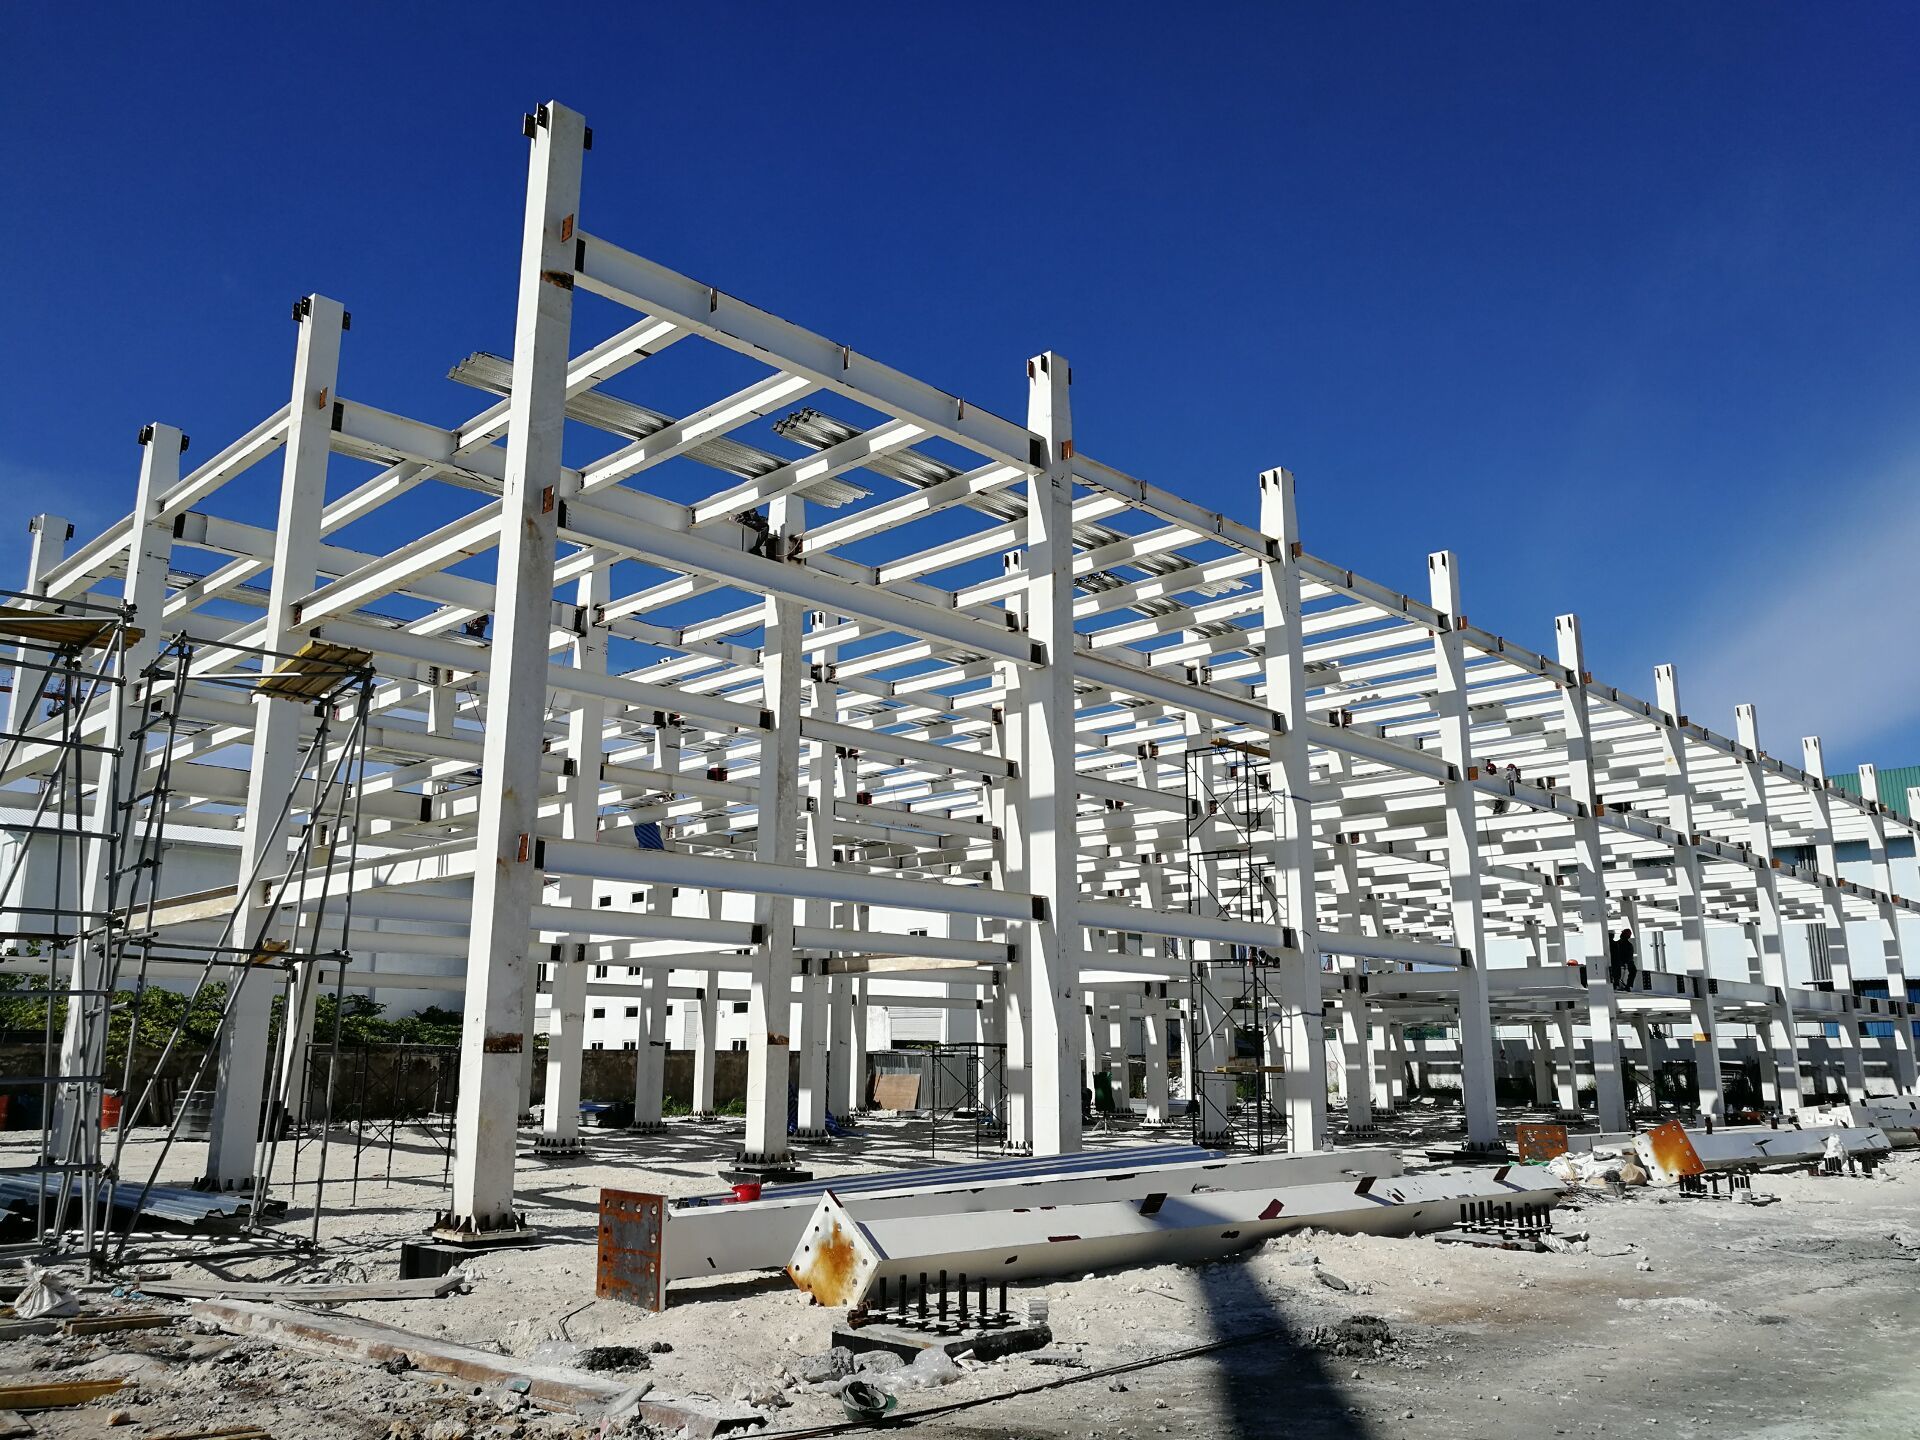 Leading steel construction firm unveils ambitious plans to build a sprawling new industrial complex featuring fifty state-of-the-art steel structure workshop and warehouse buildings across a hundred acre site.